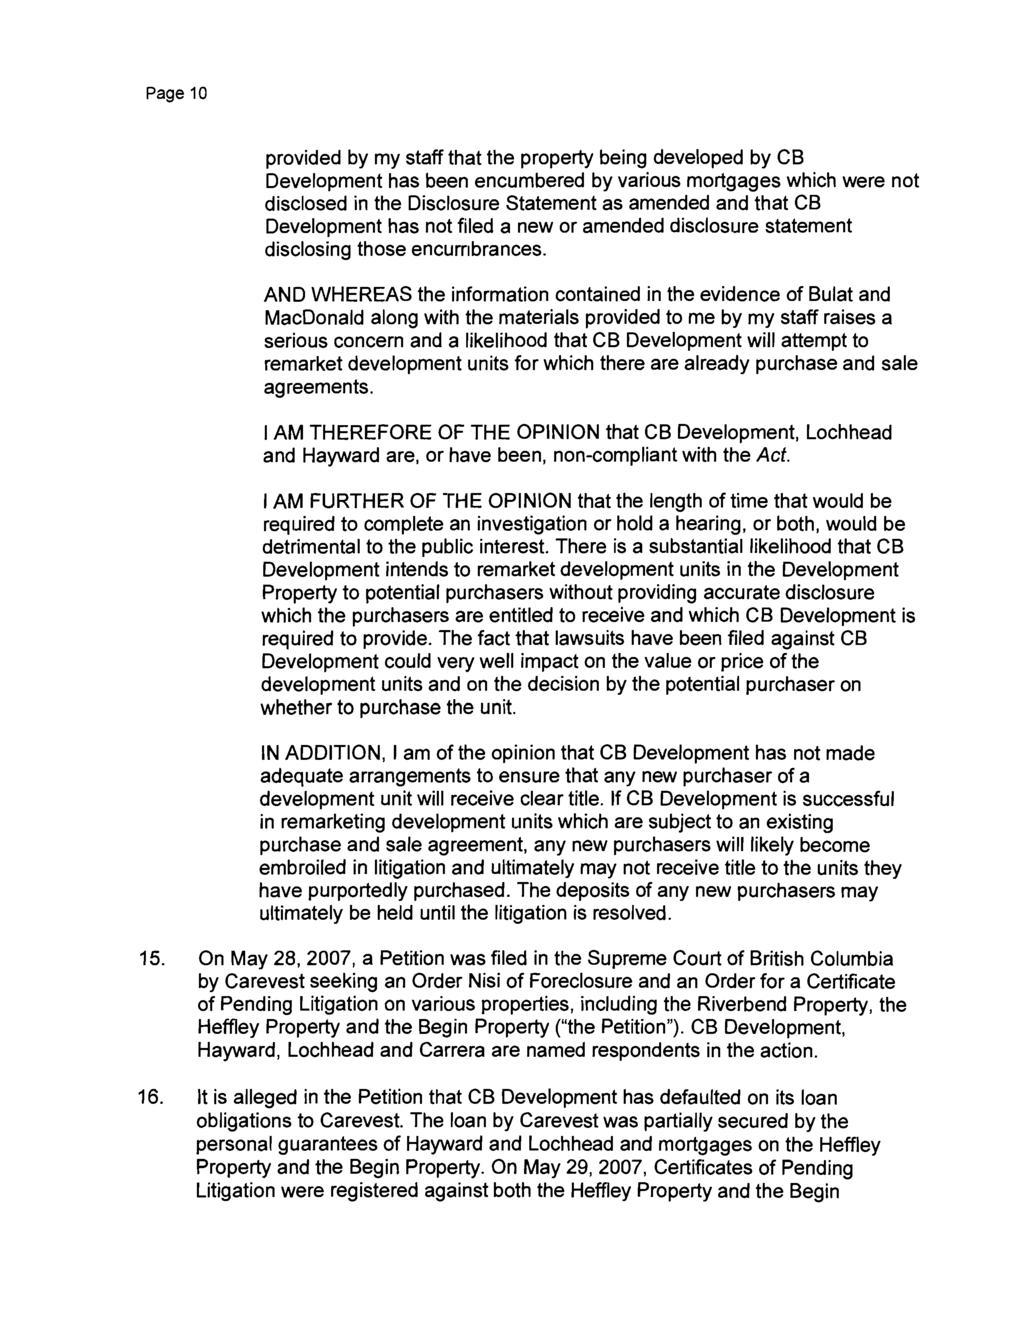 Page 10 provided by my staff that the property being developed by CB Development has been encumbered by various mortgages which were not disclosed in the Disclosure Statement as amended and that CB